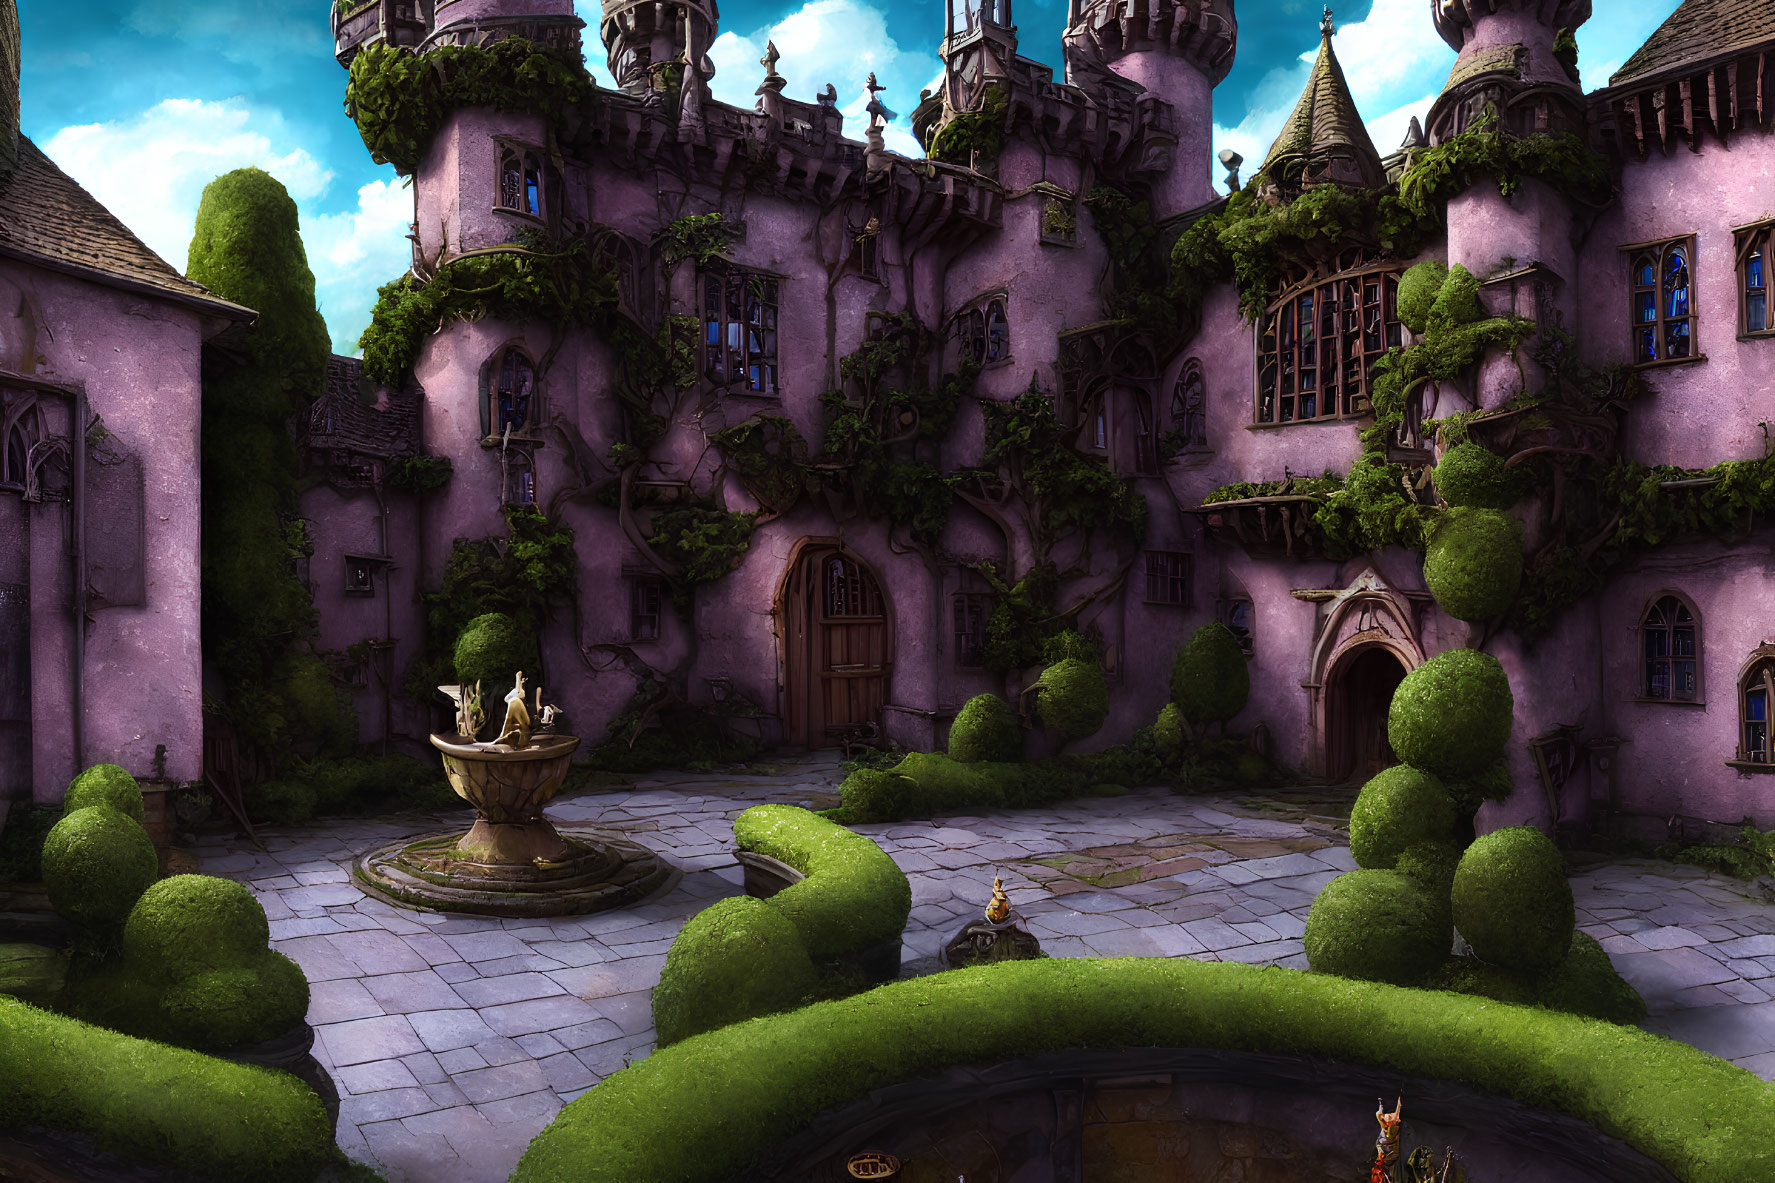 Purple Castle with Ivy-Covered Walls and Majestic Fountain